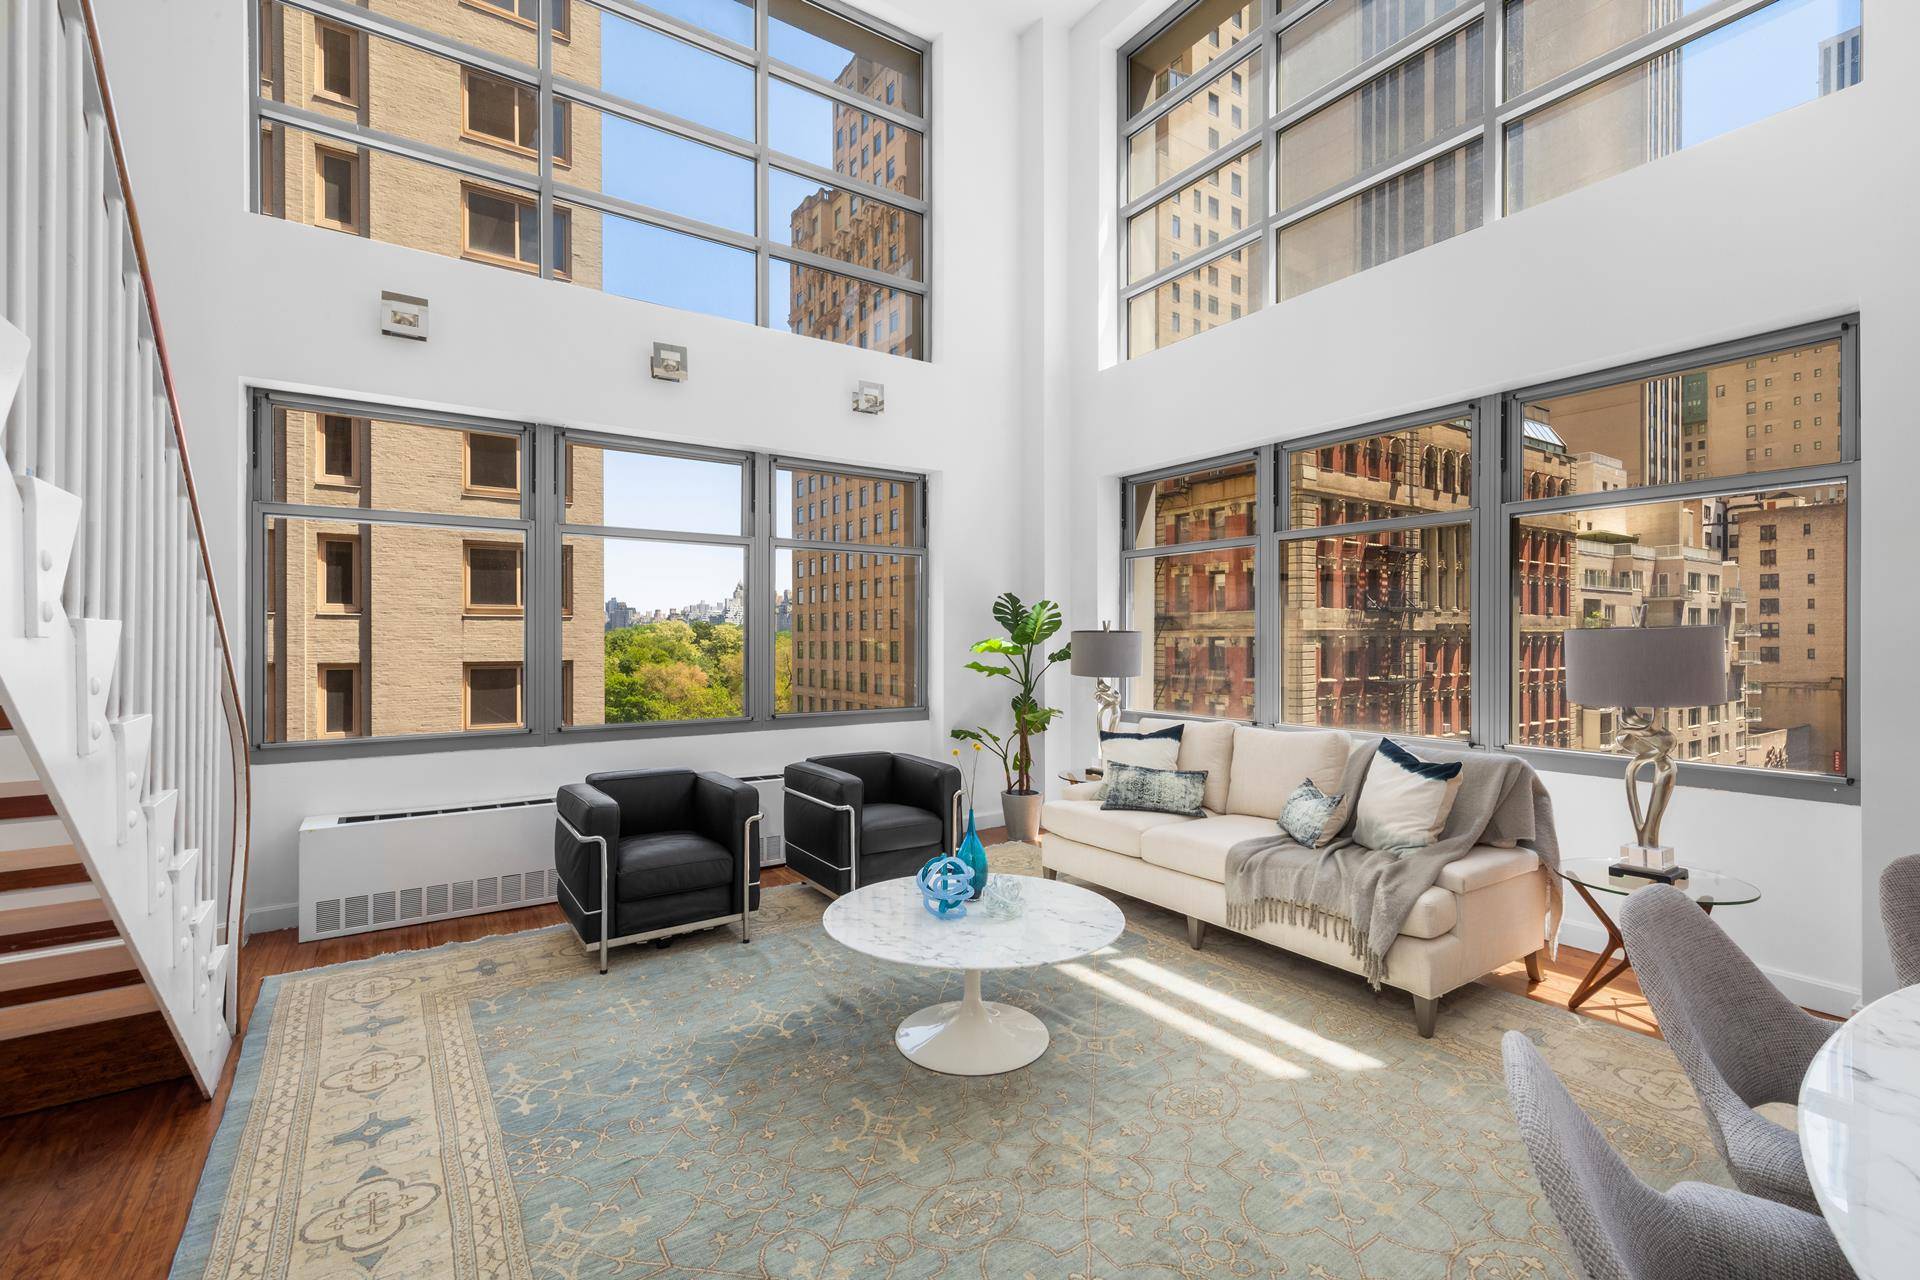 Introducing 8D at 100 West 58th Street, one of the most unique layouts in the iconic Windsor Park Condominium.